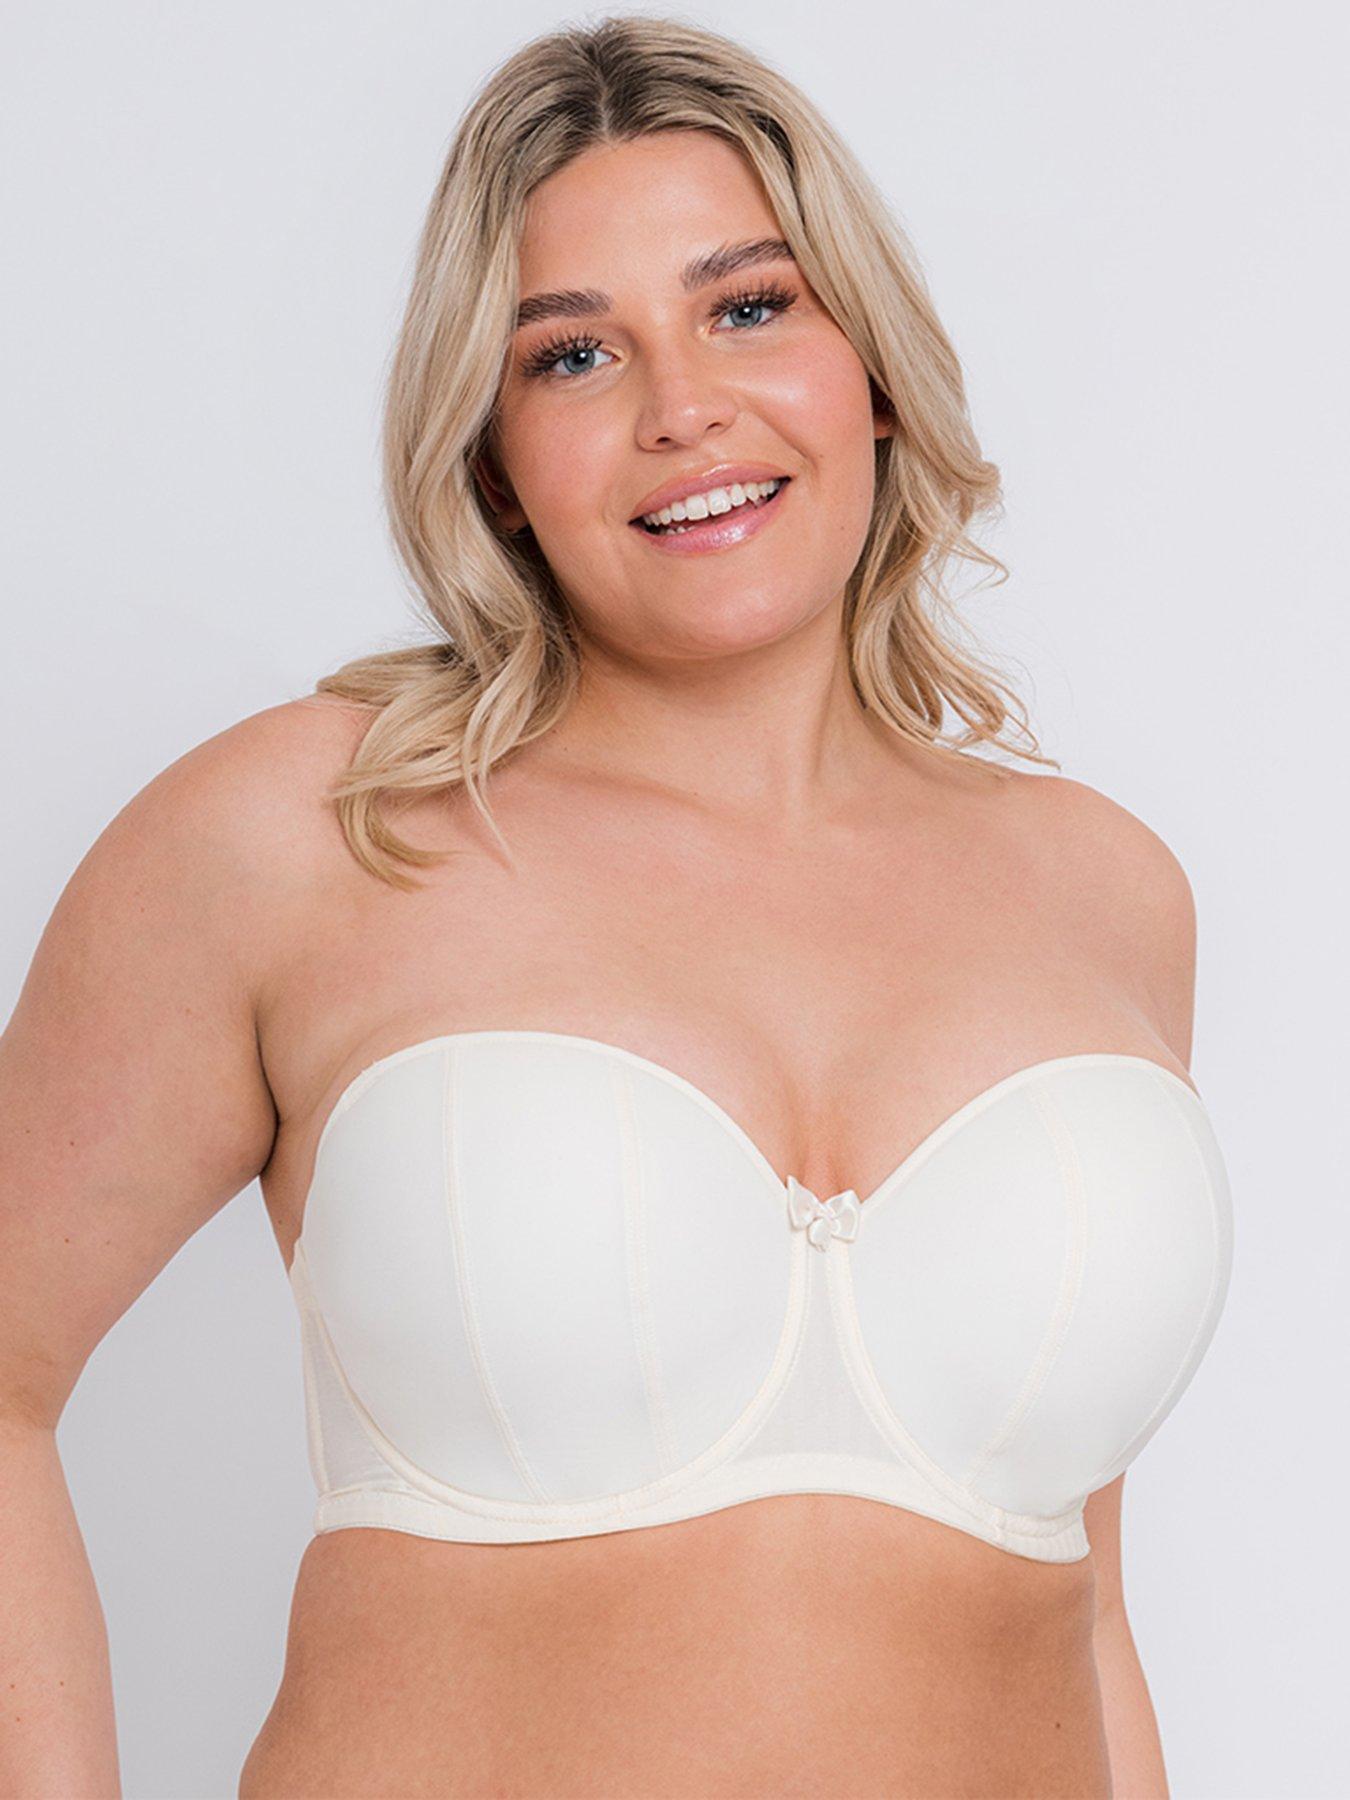 Super Boost Push Up Padded Wire Free Bra Size 32 34 36 38 A B C